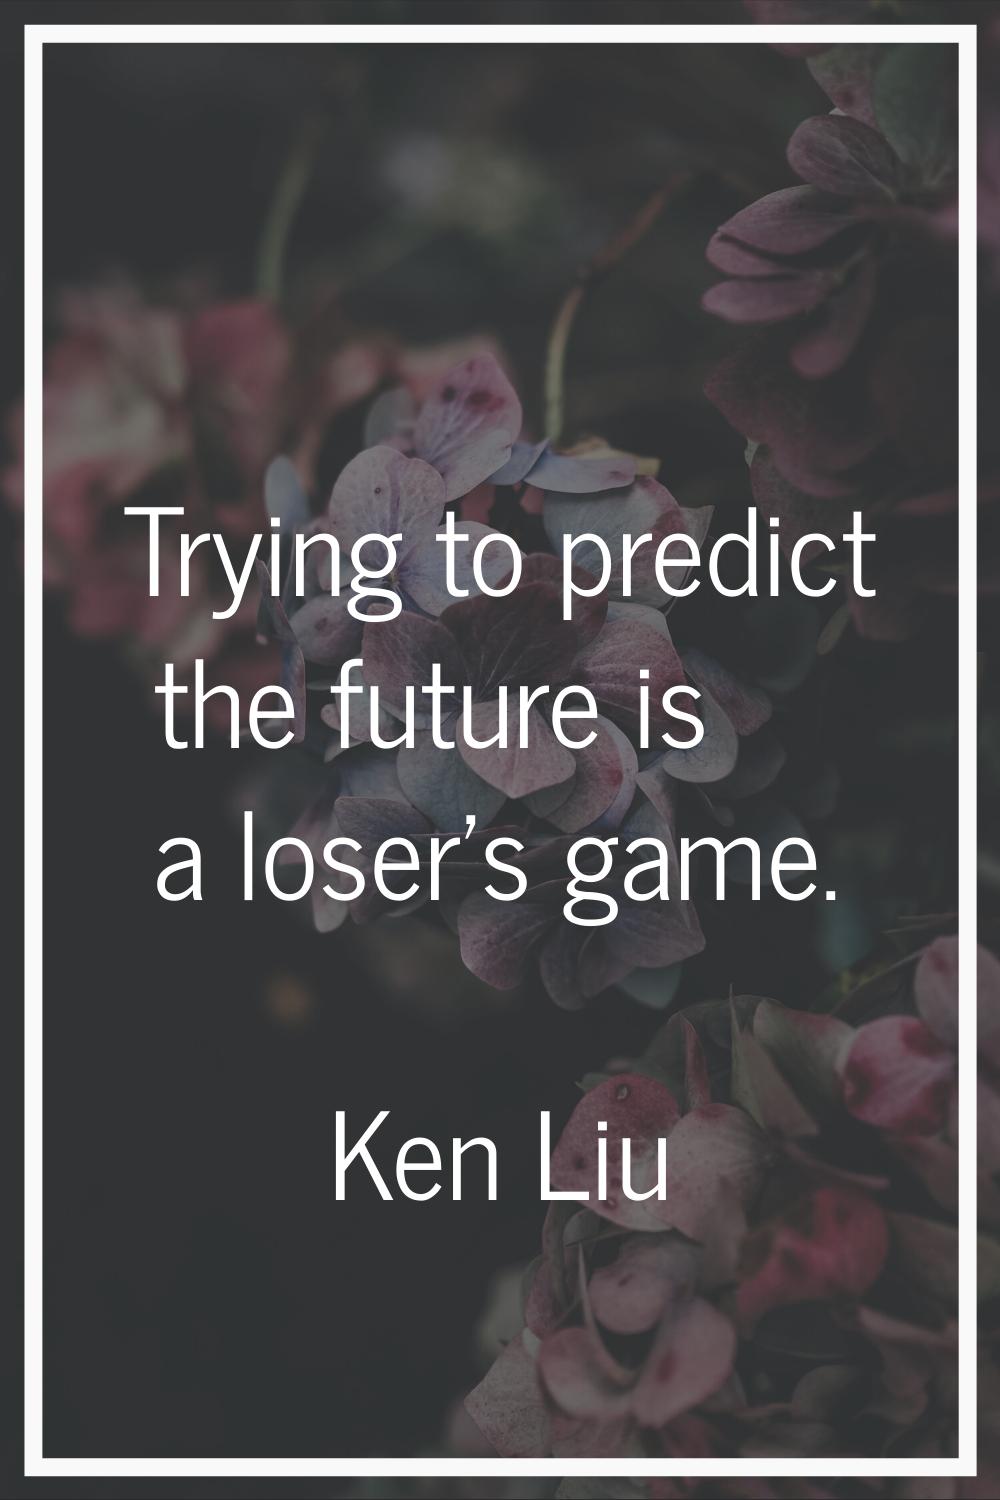 Trying to predict the future is a loser's game.